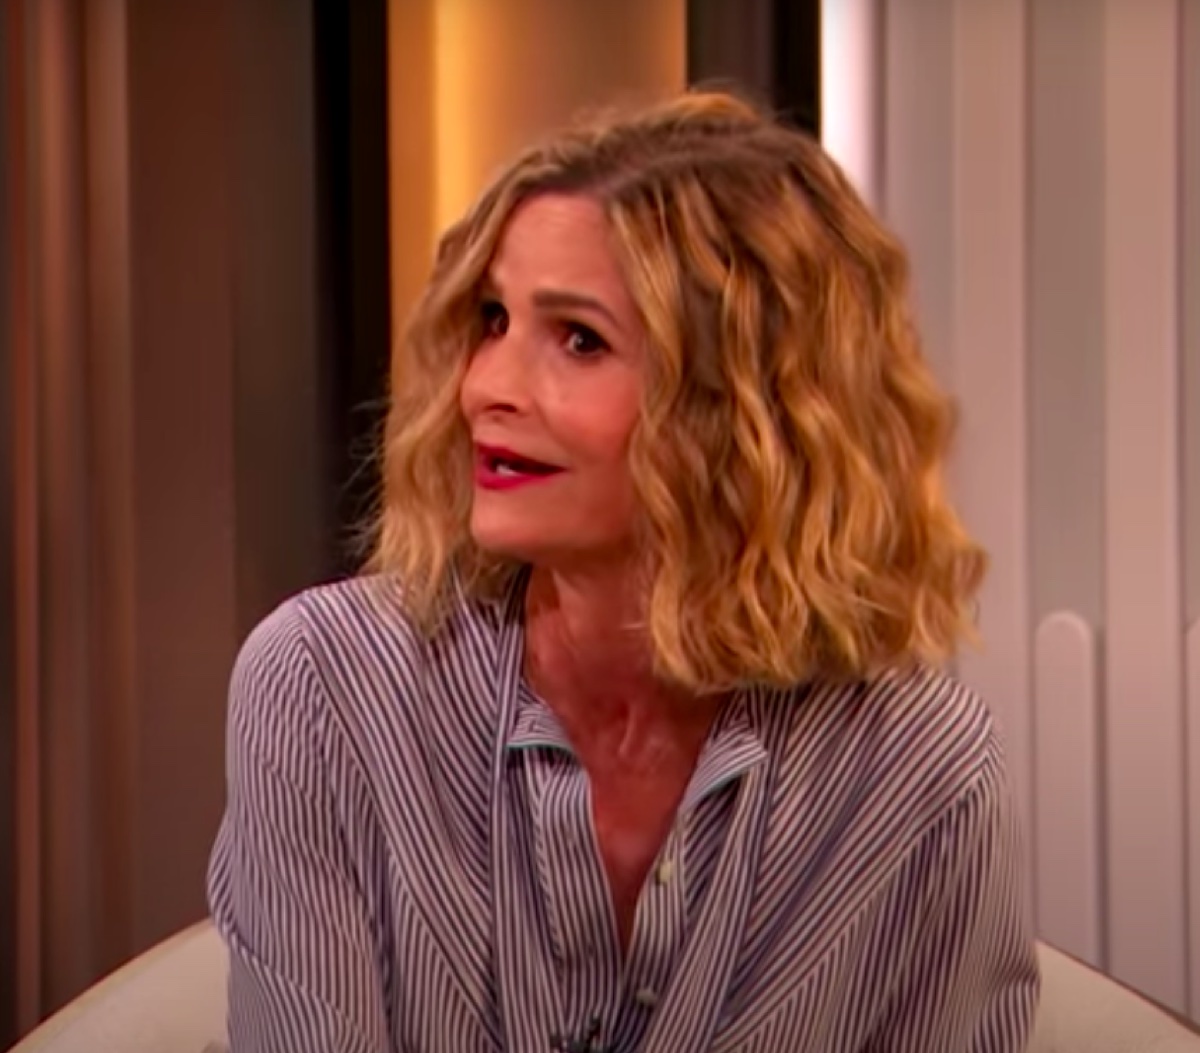 Kyra Sedgwick on The Drew Barrymore Show